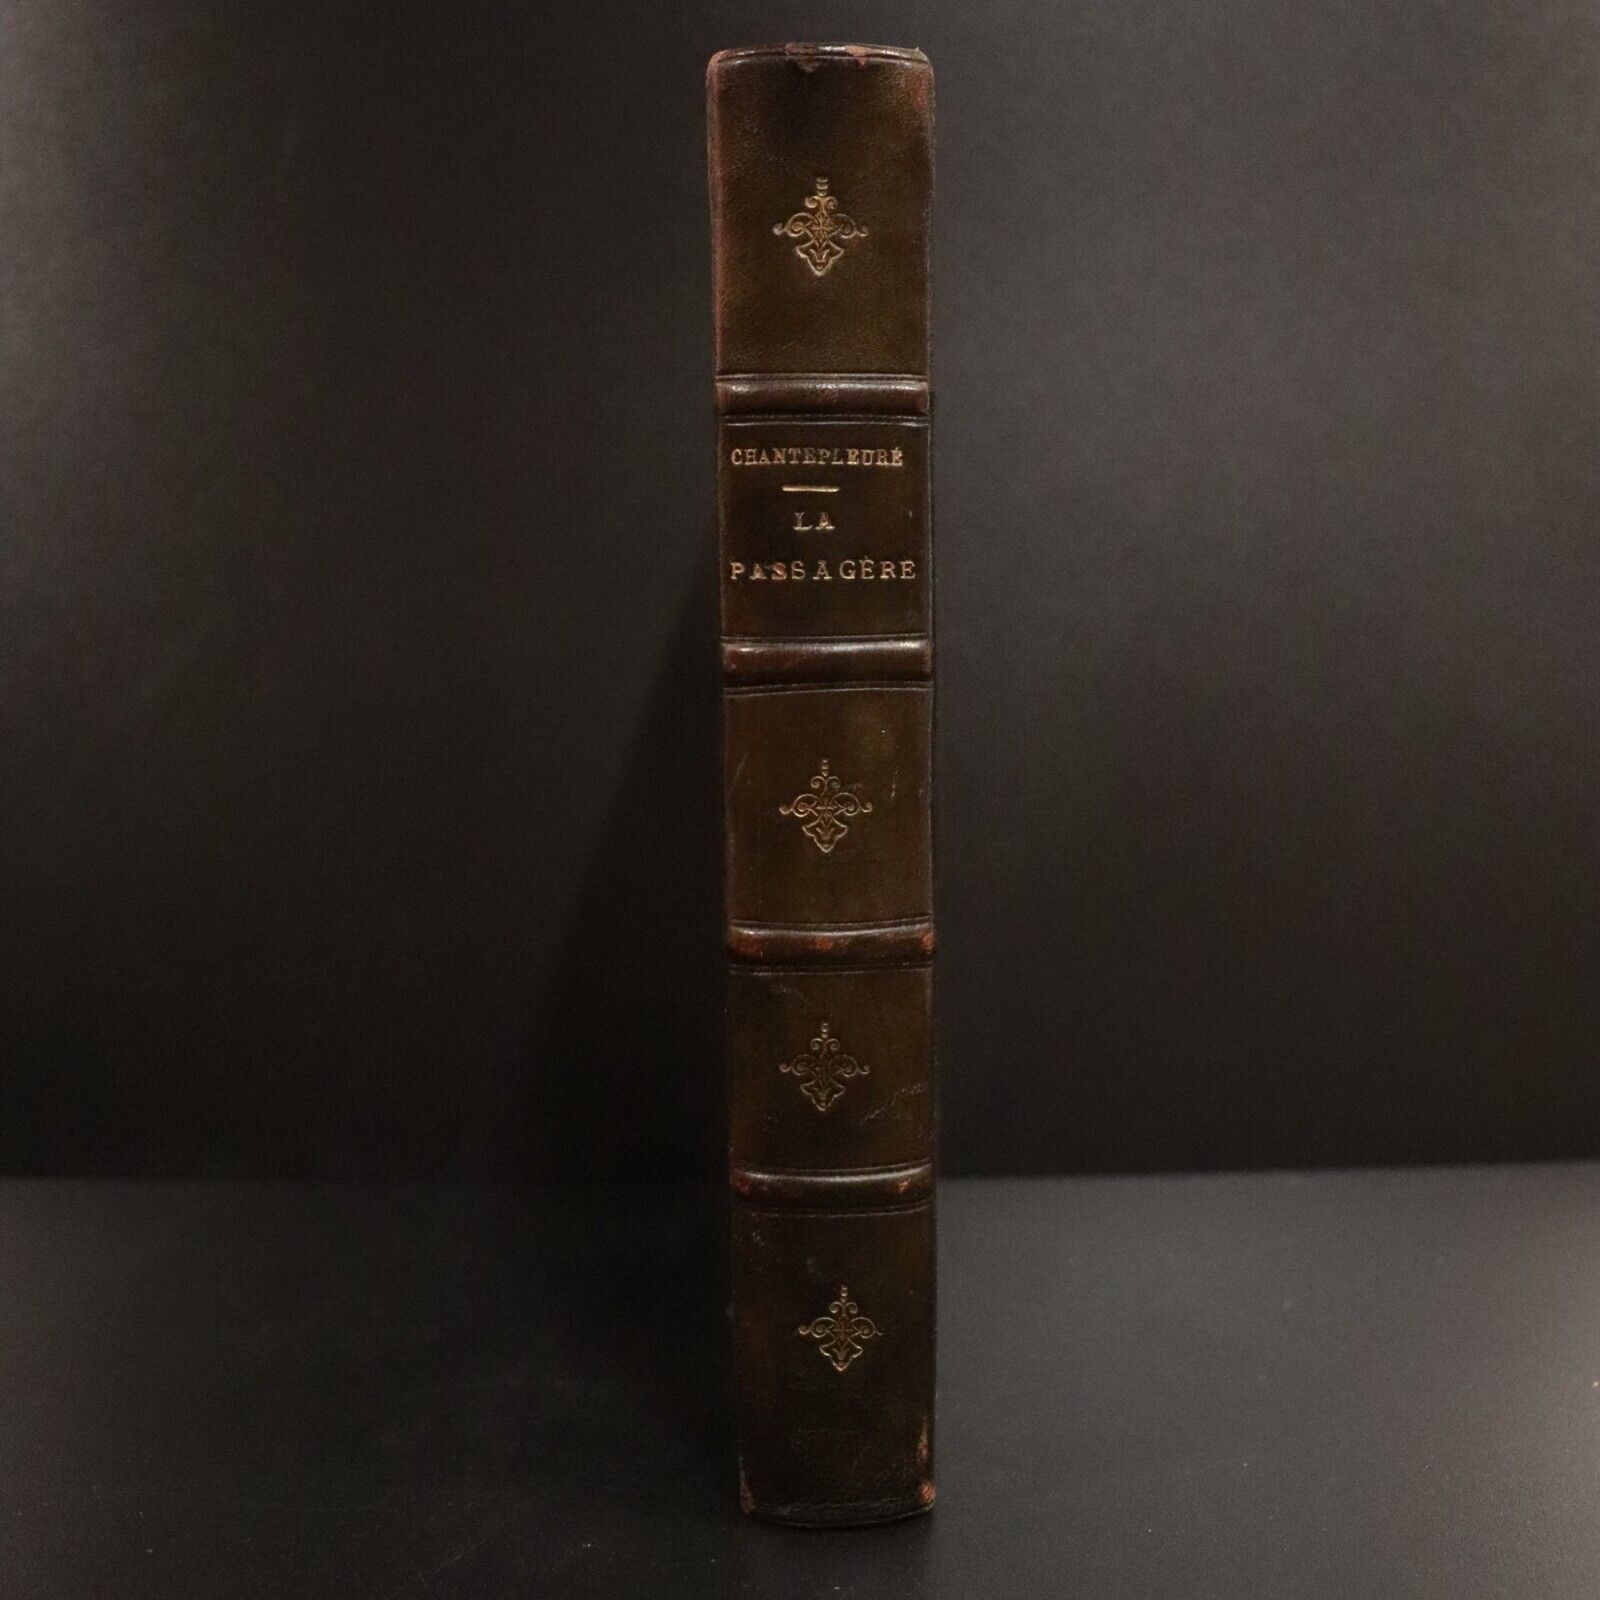 1911 La Passagere by Guy Chantepleure Antiquarian French Fiction Book